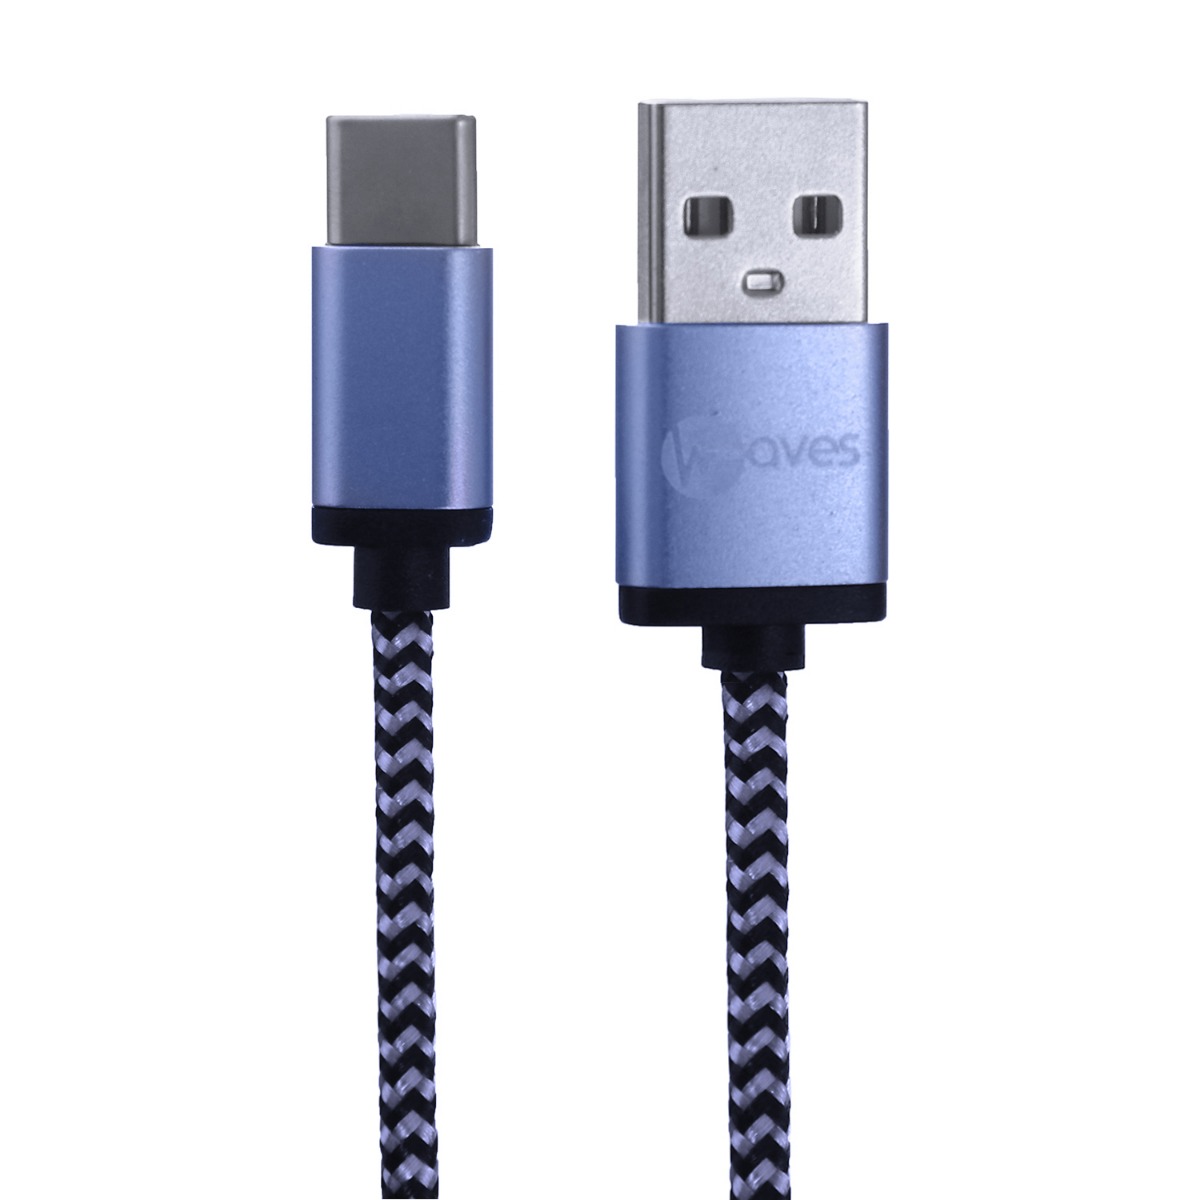 Waves Type-C USB Charging Cable, 1.2 Meters - Grey